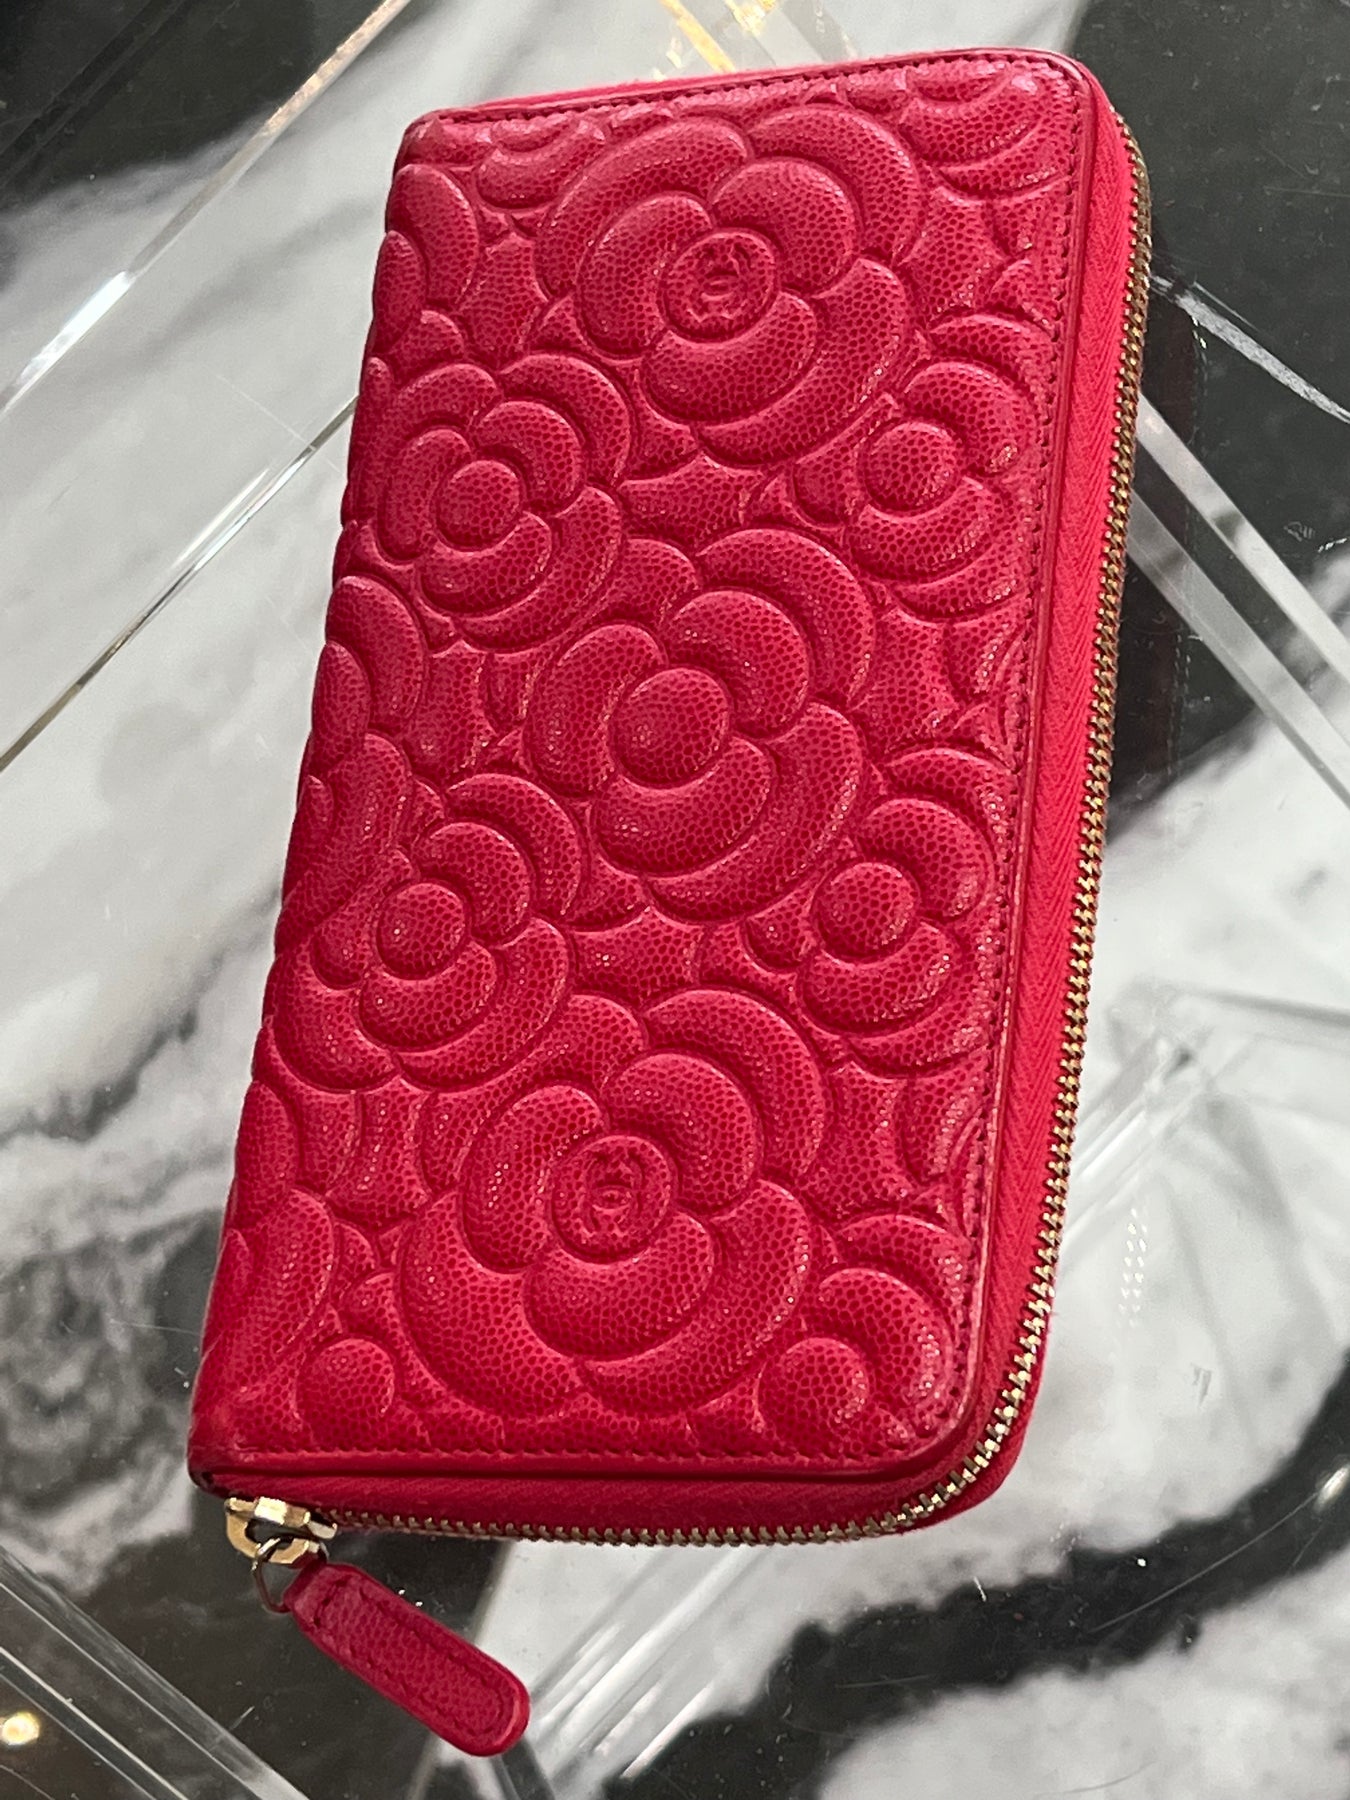 Chanel Zippy Embossed Leather Camellia Wallet